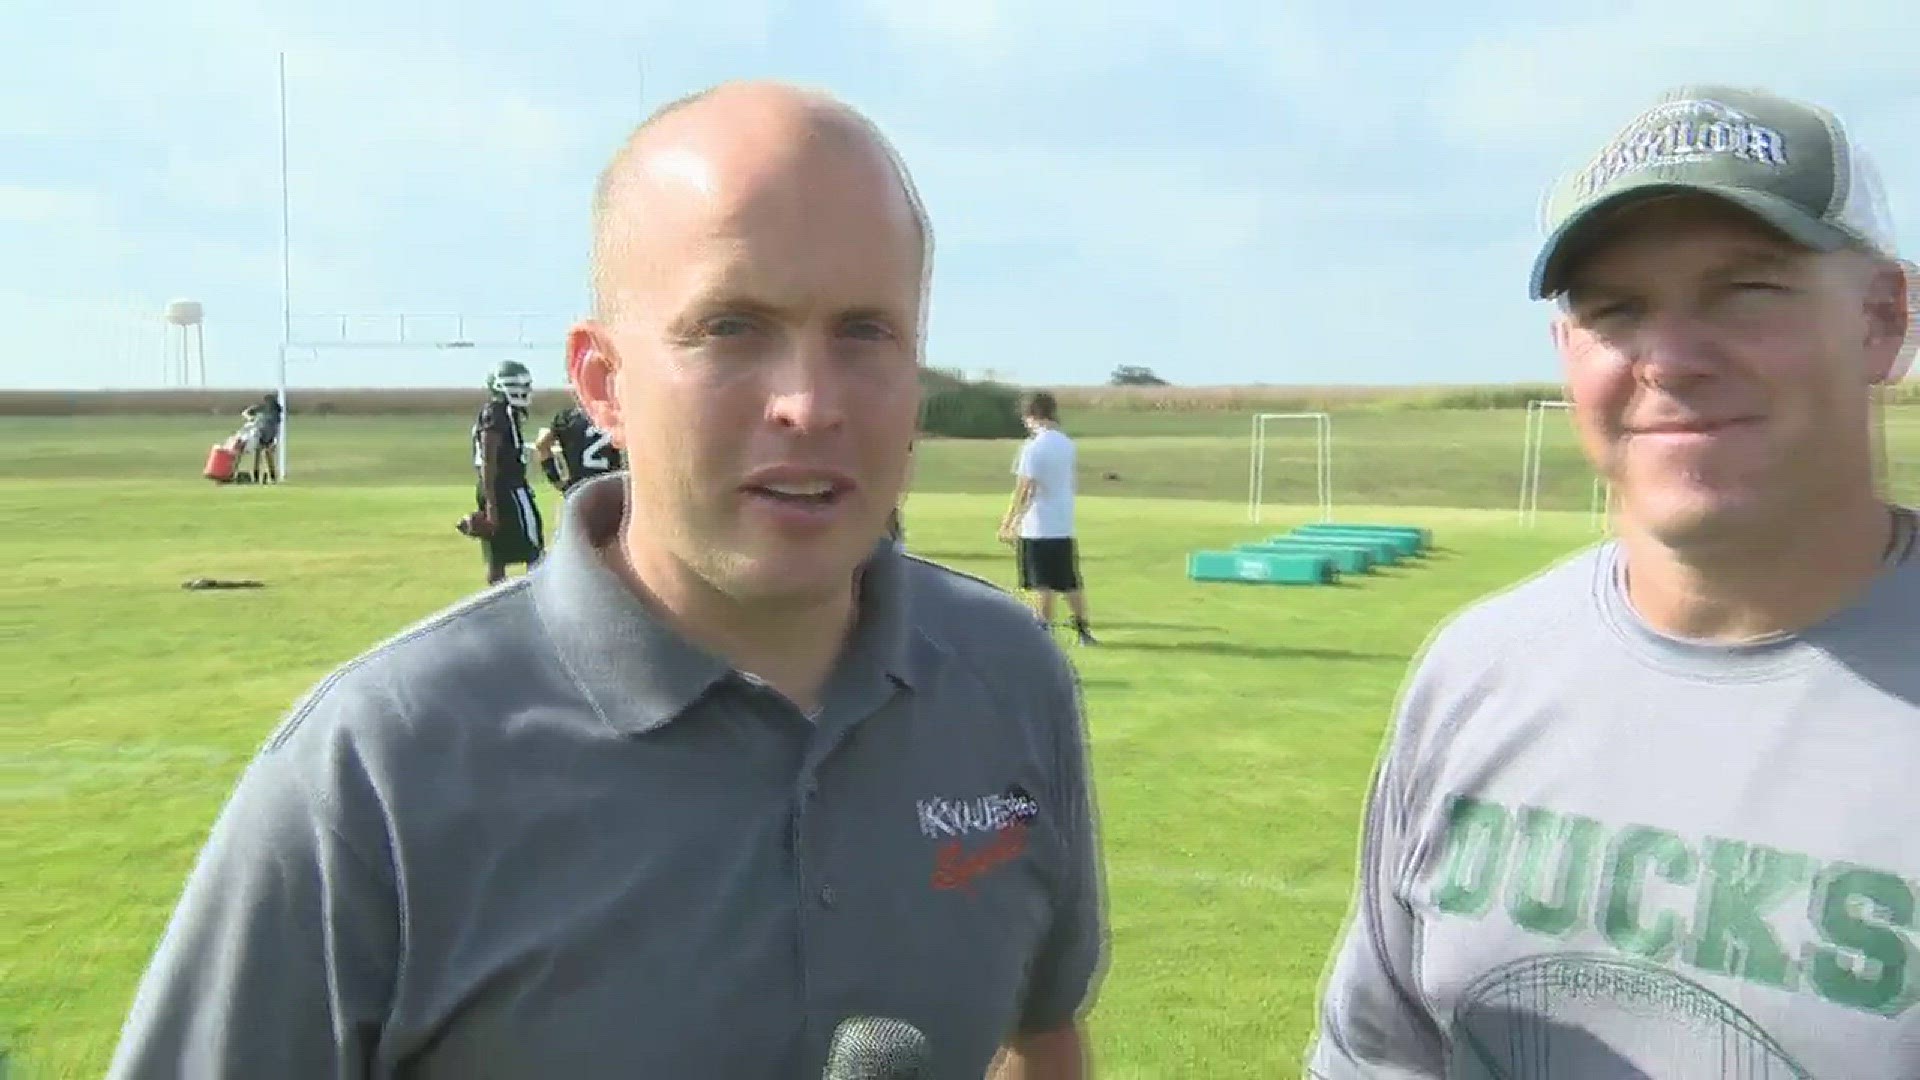 Taylor football preview with KVUE's Shawn Clynch and coach Rusty Purser